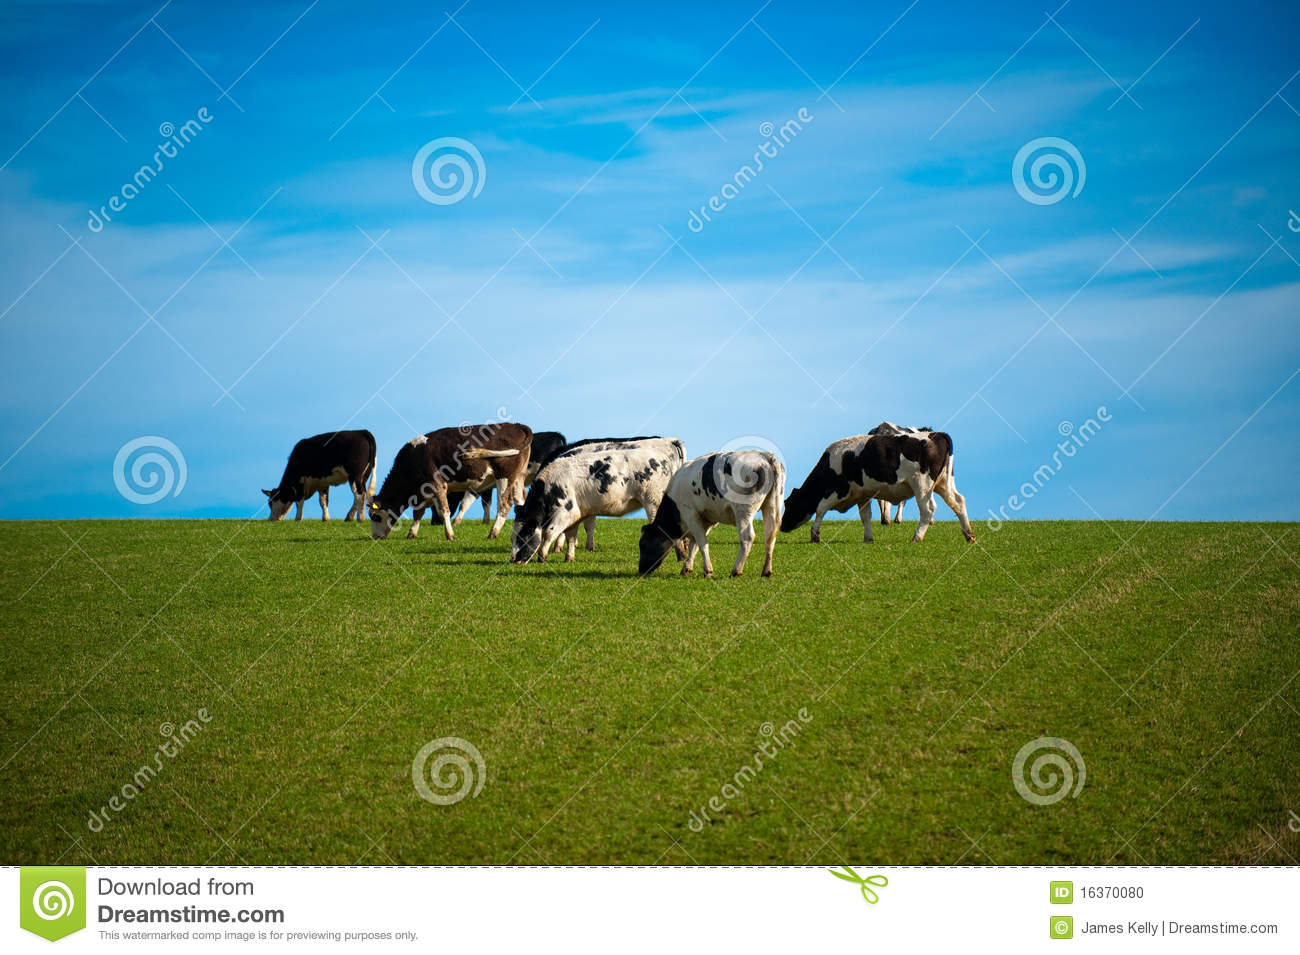 Cows In Green Pasture Stock Photo   Image  16370080